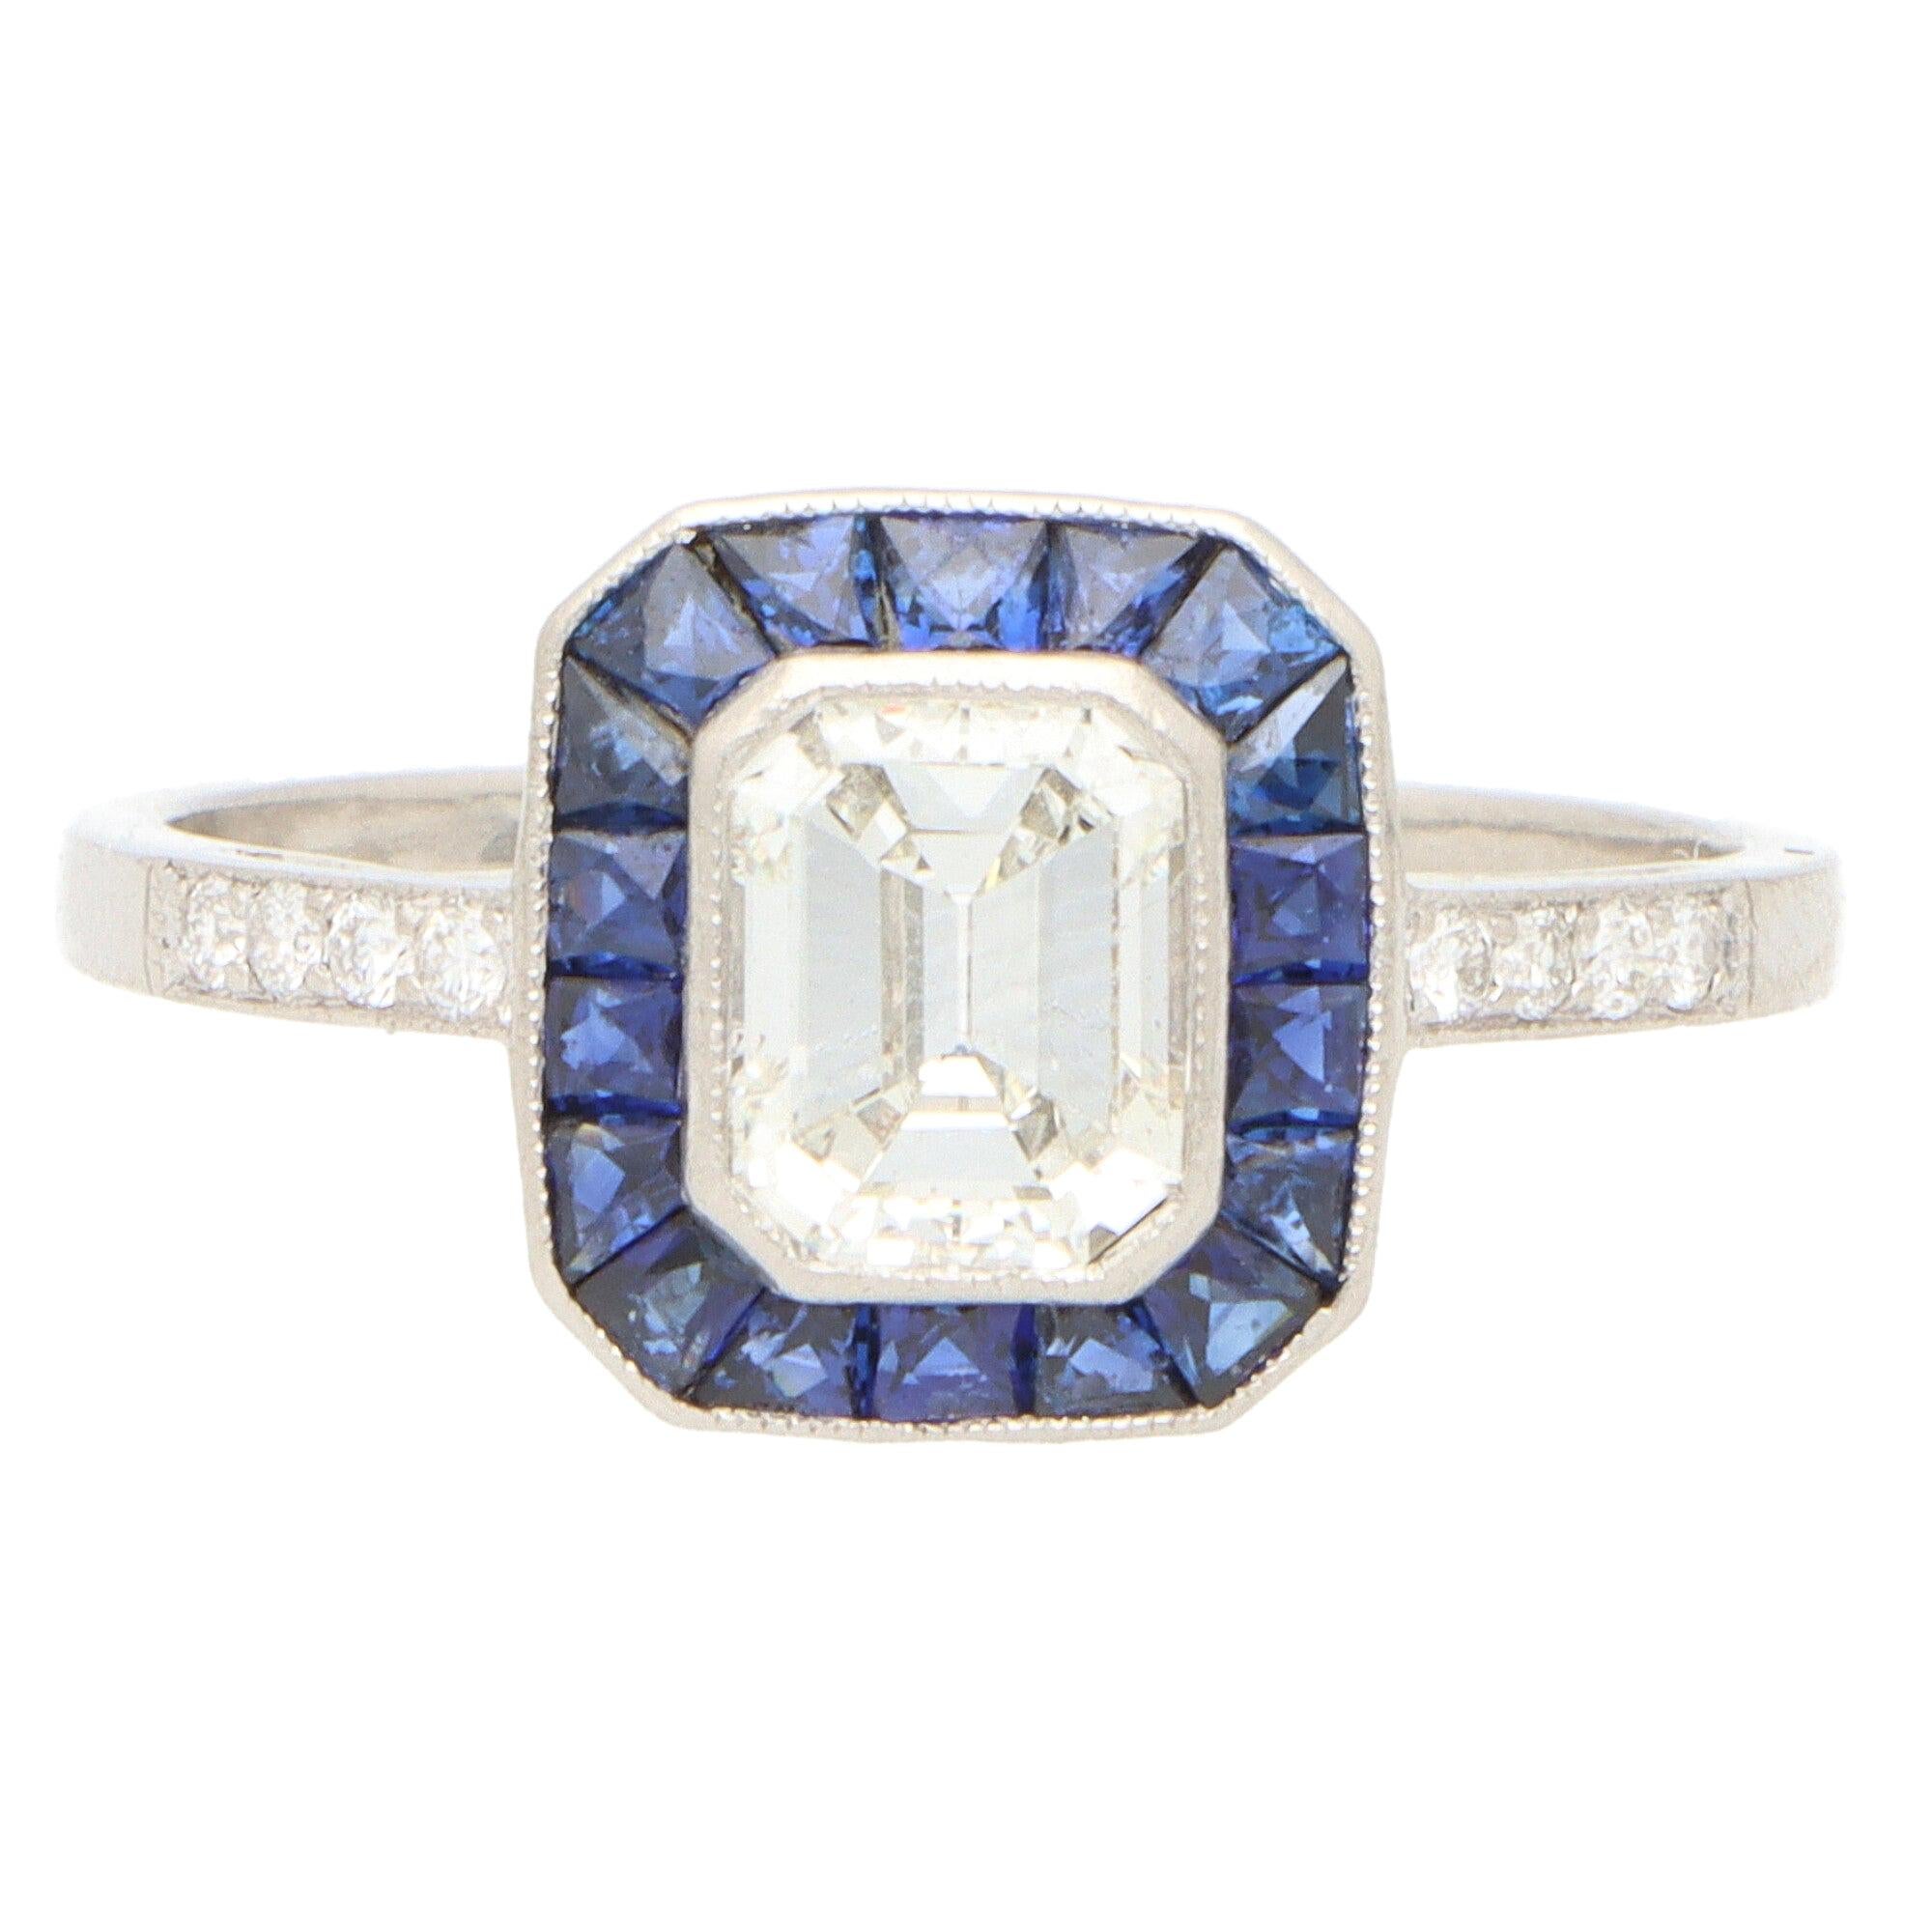 Art Deco Style Emerald Cut Diamond and Sapphire Halo Engagement Ring in Platinum